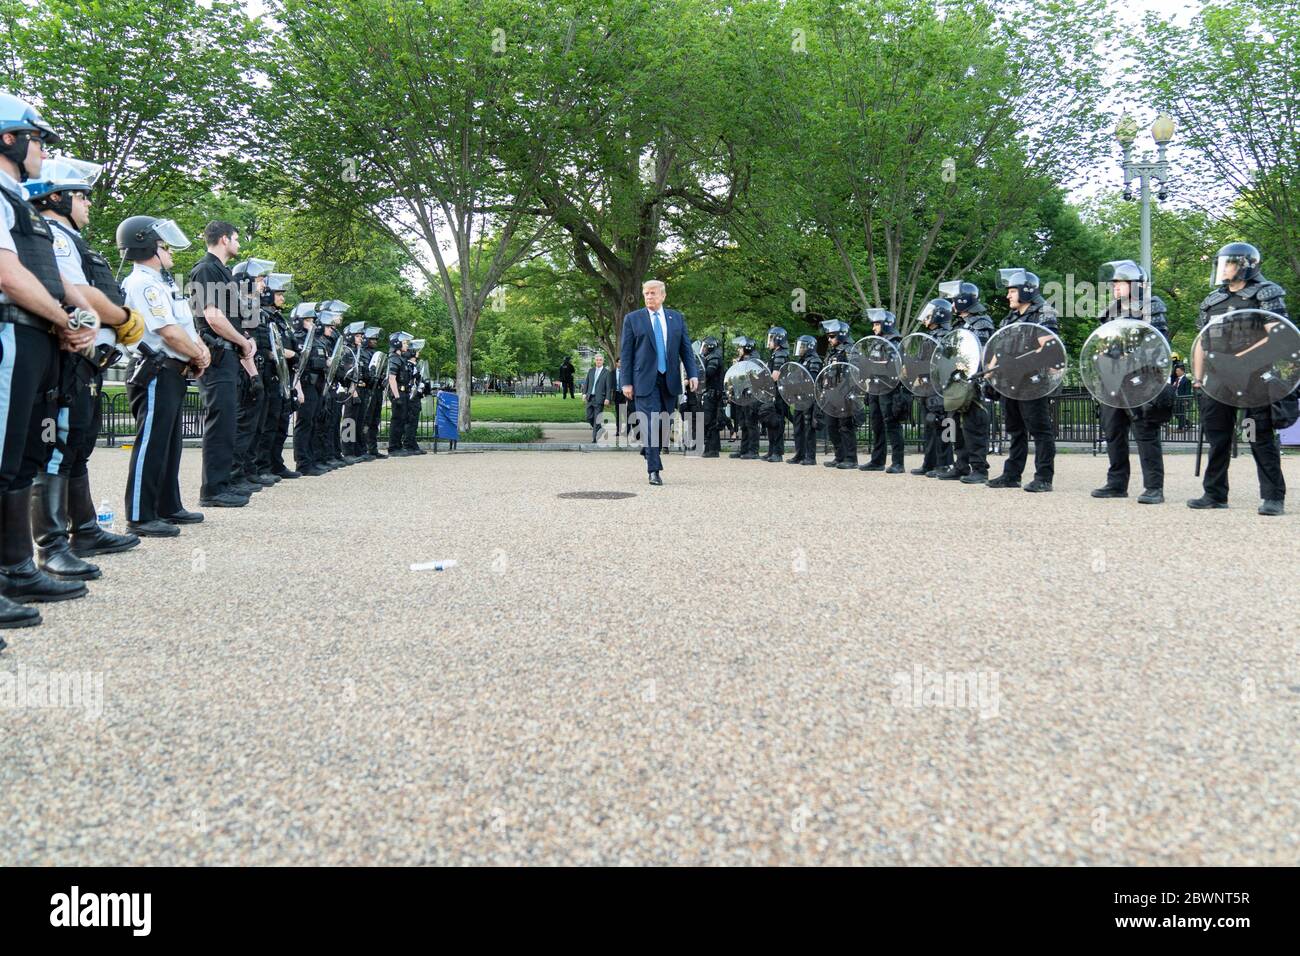 Washington, United States Of America. 01st June, 2020. Washington, United States of America. 01 June, 2020. U.S. President Donald Trump walks across Lafayette Square to St Johns Episcopal Church through a phalanx of riot police June 1, 2020 in Washington, DC Trump had the area cleared by police using tear gas on peaceful protesters for the photo op. Credit: Shealah Craighead/White House Photo/Alamy Live News Stock Photo